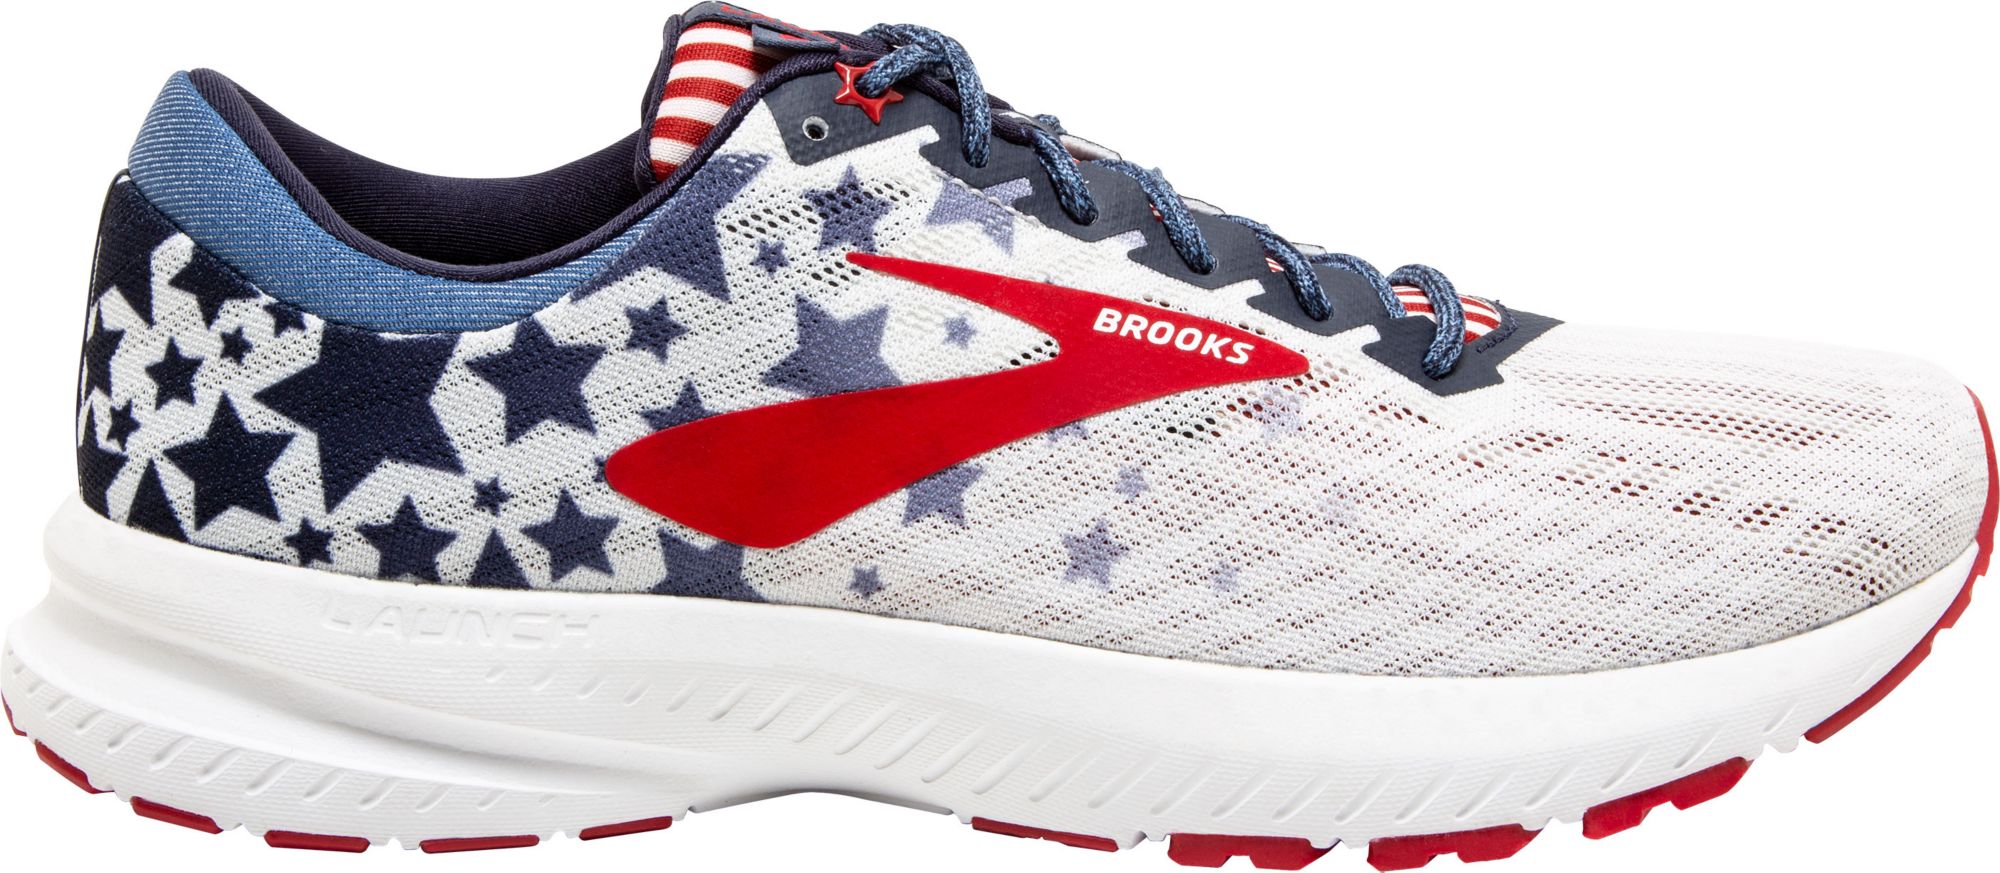 brooks launch running shoes